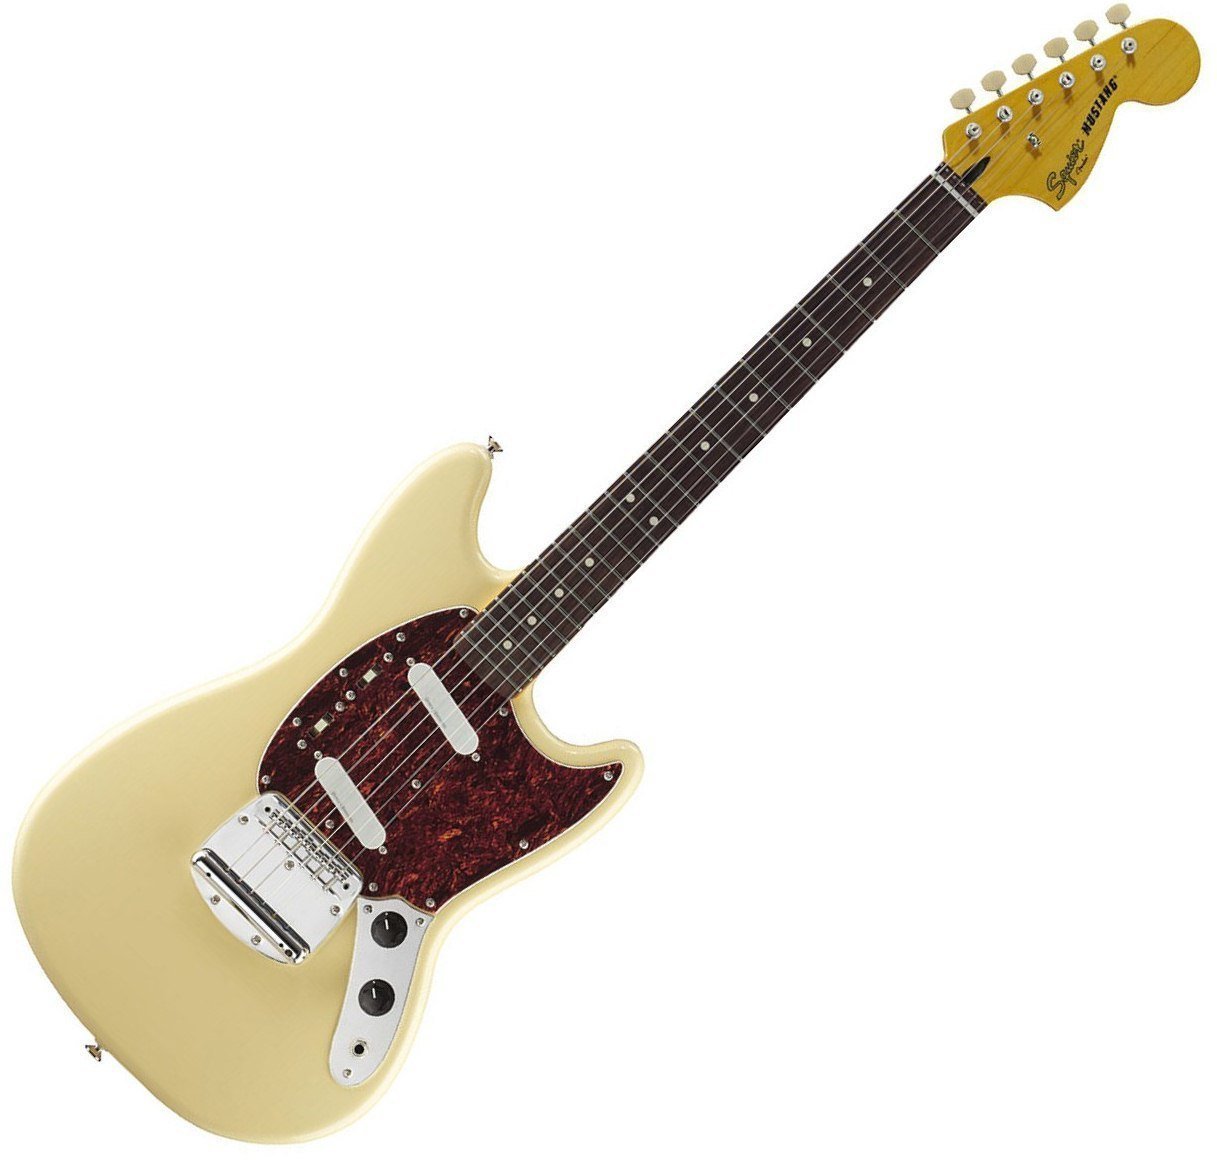 Electric guitar Fender Squier Vintage Modified Mustang Vintage White